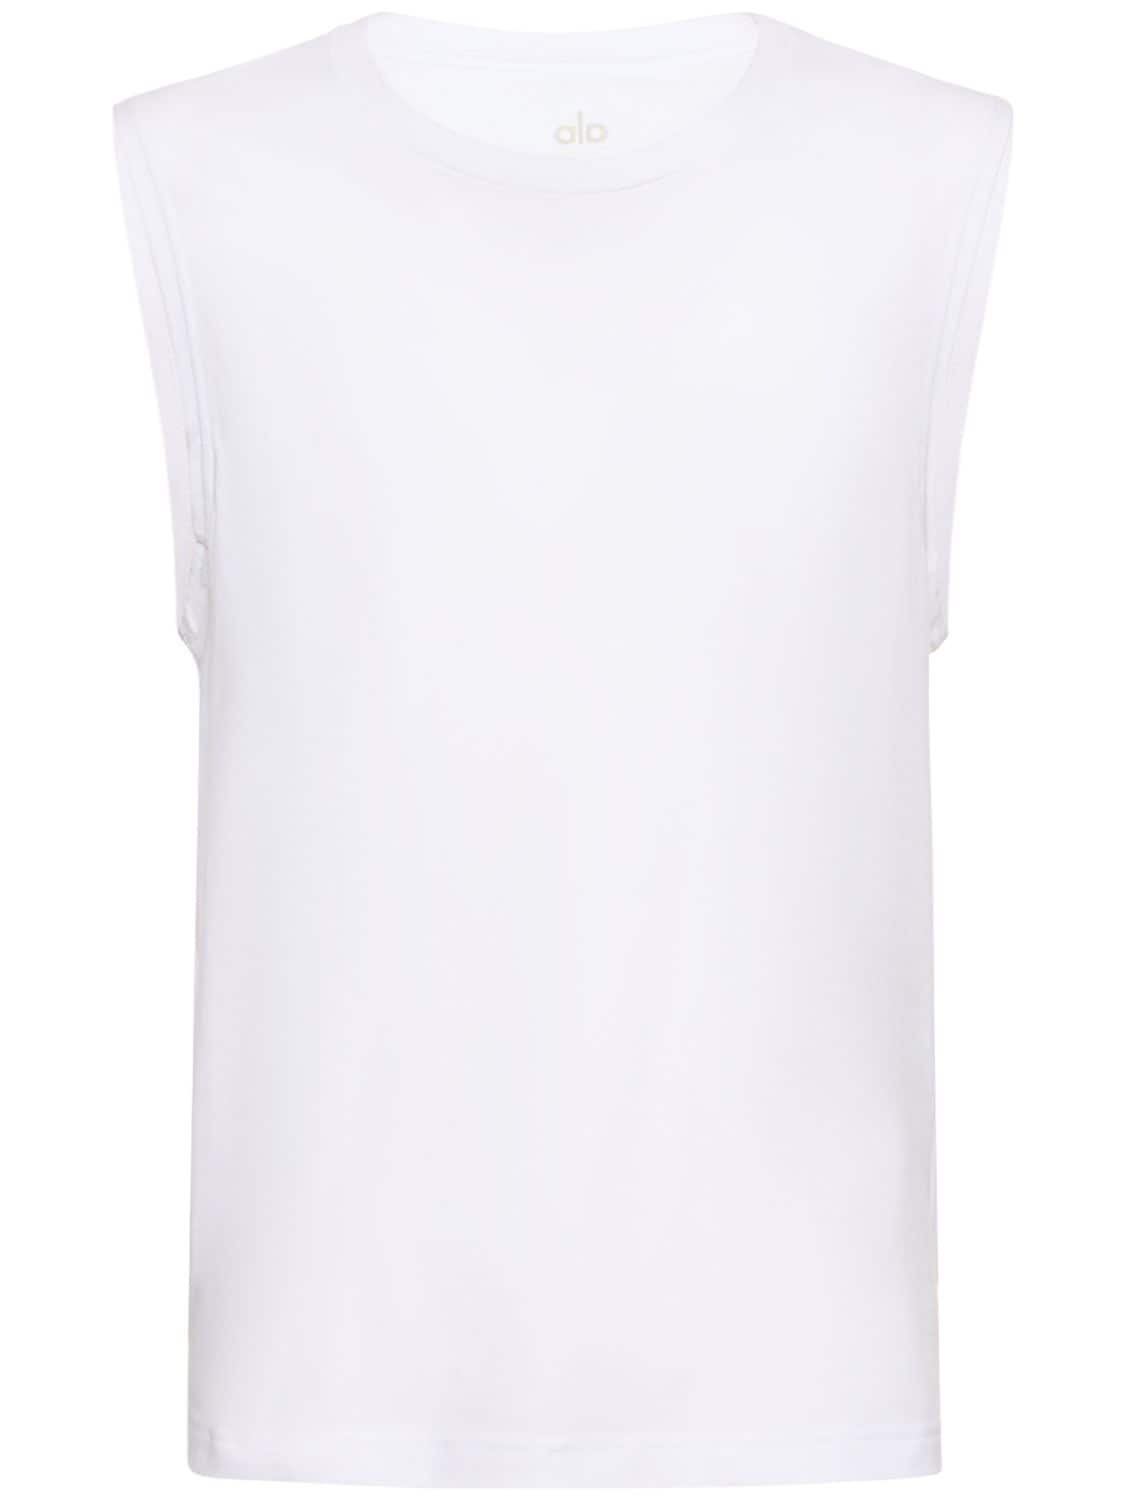 ALO YOGA THE TRIUMPH SLIM FIT MUSCLE TANK TOP